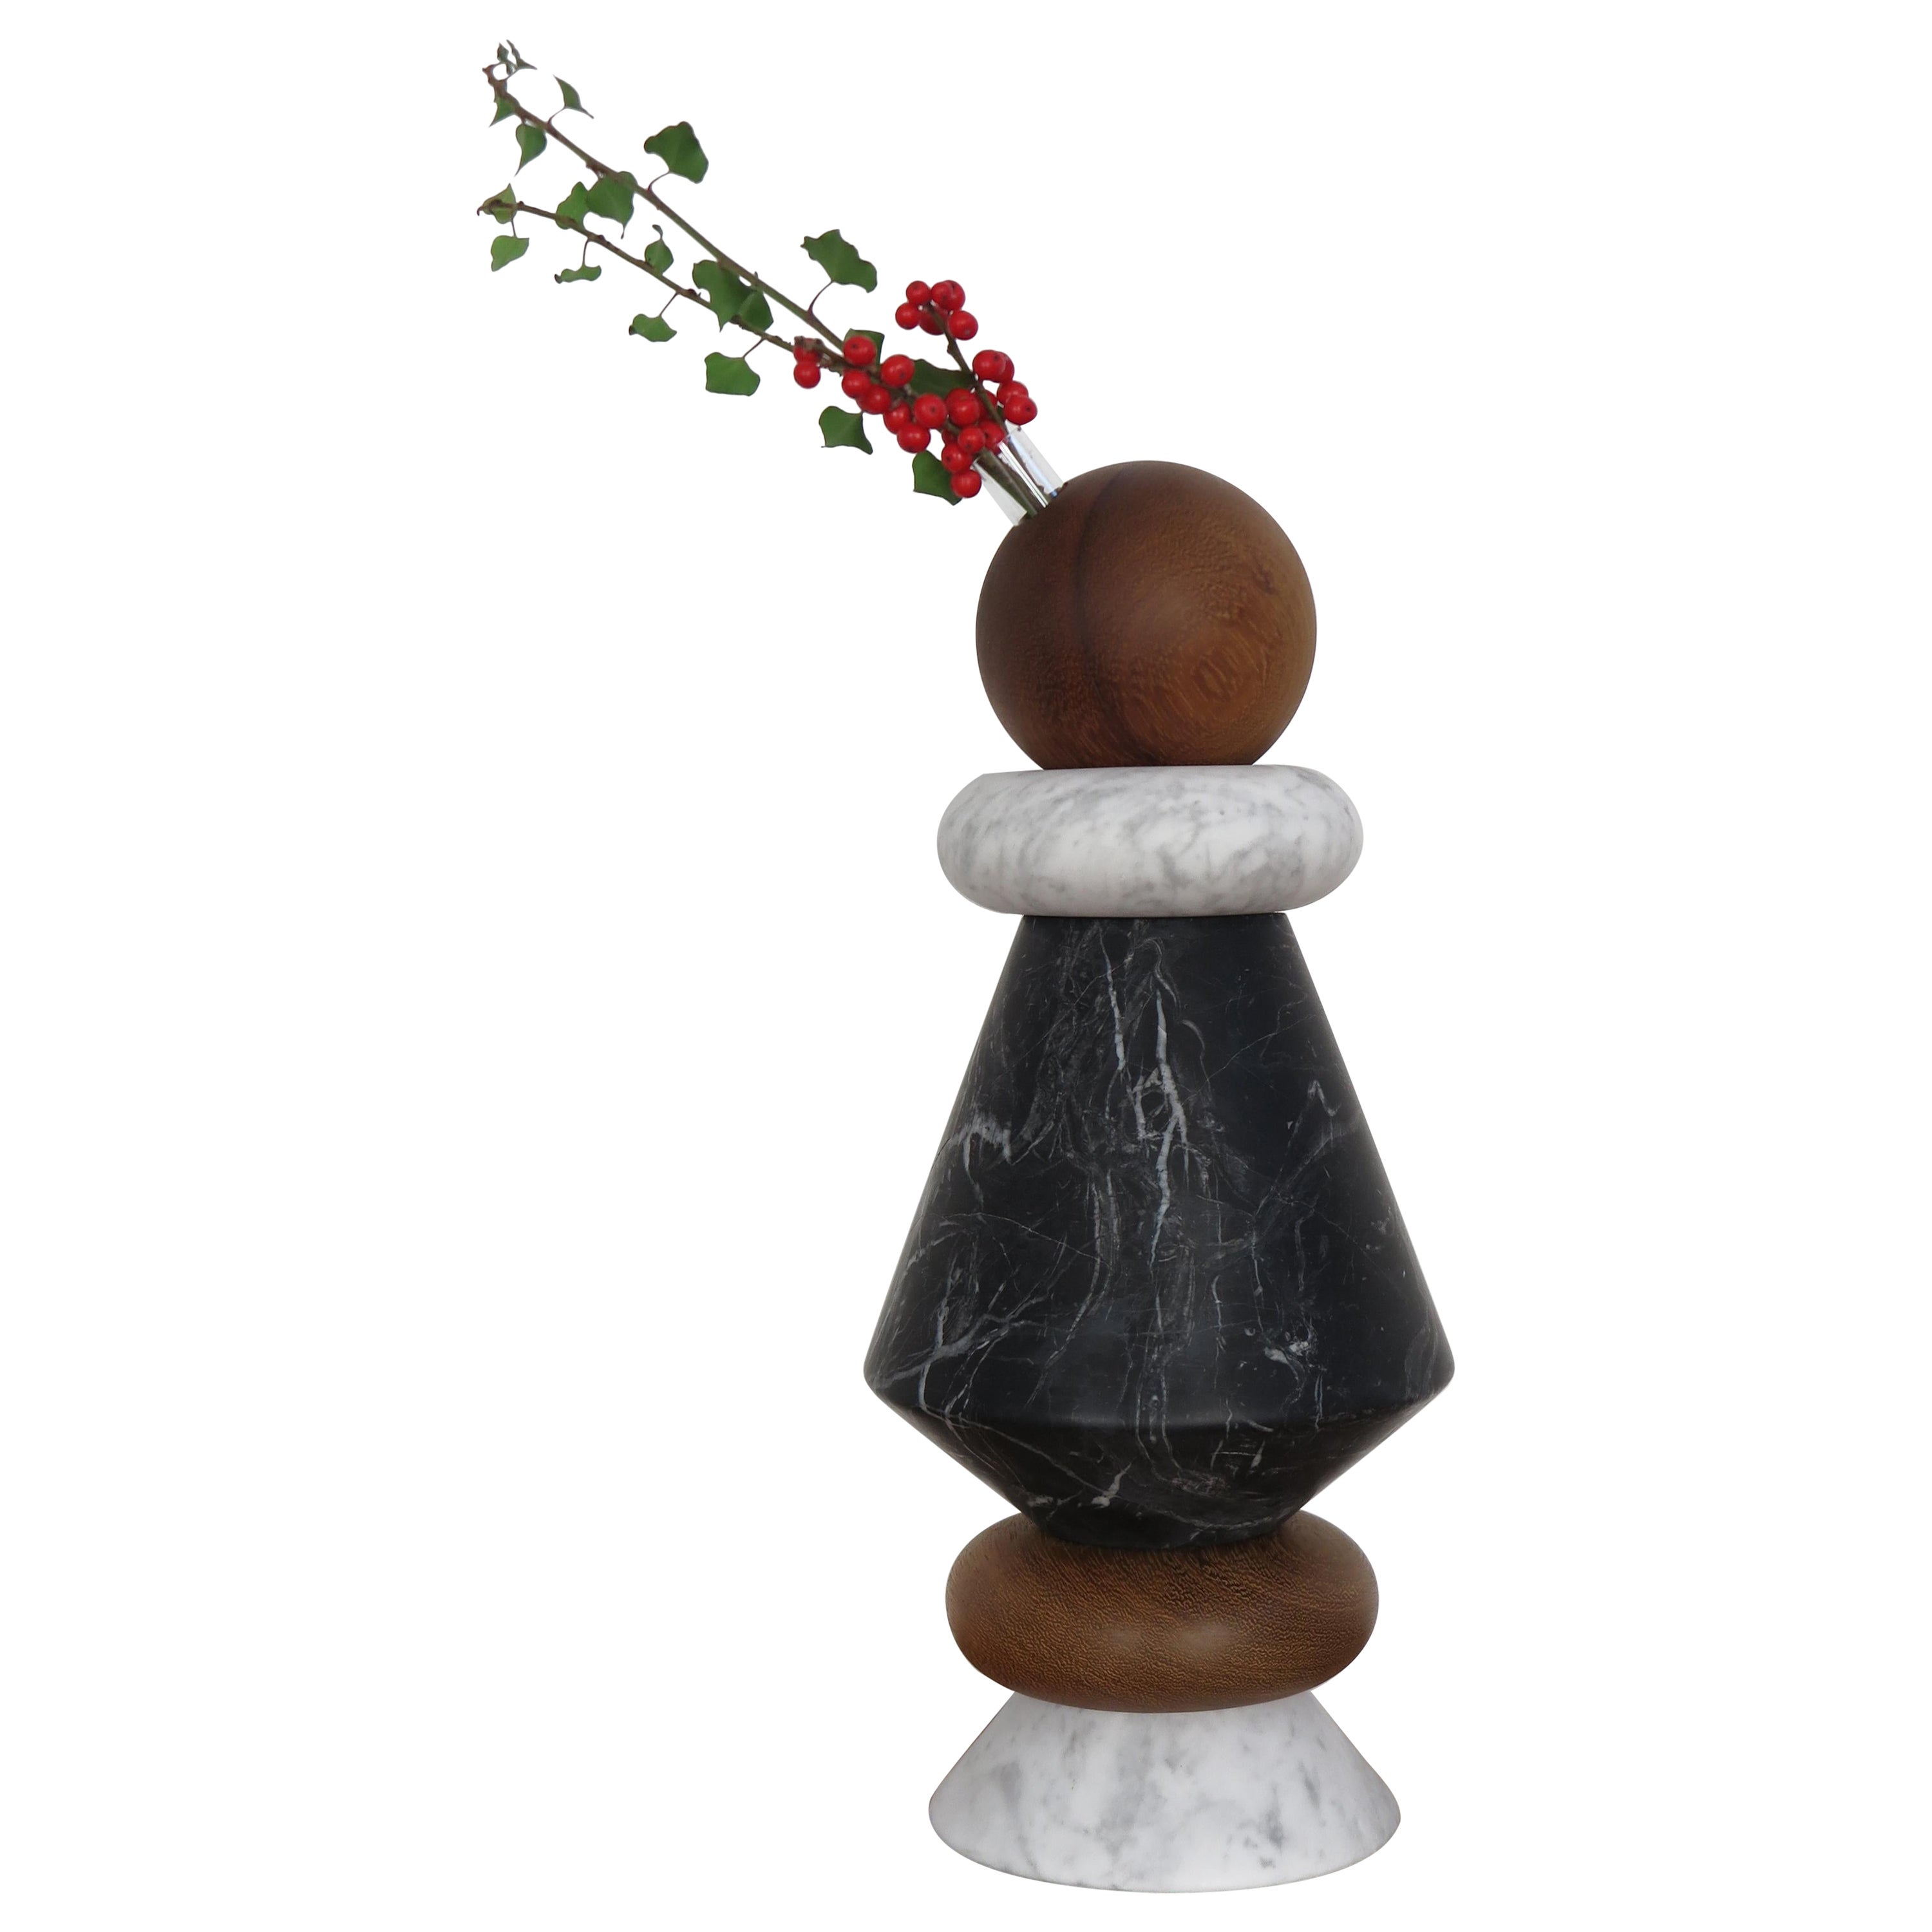 Italian Marble and Wood Contemporary Sculpture, Flower Vase "iTotem" For Sale